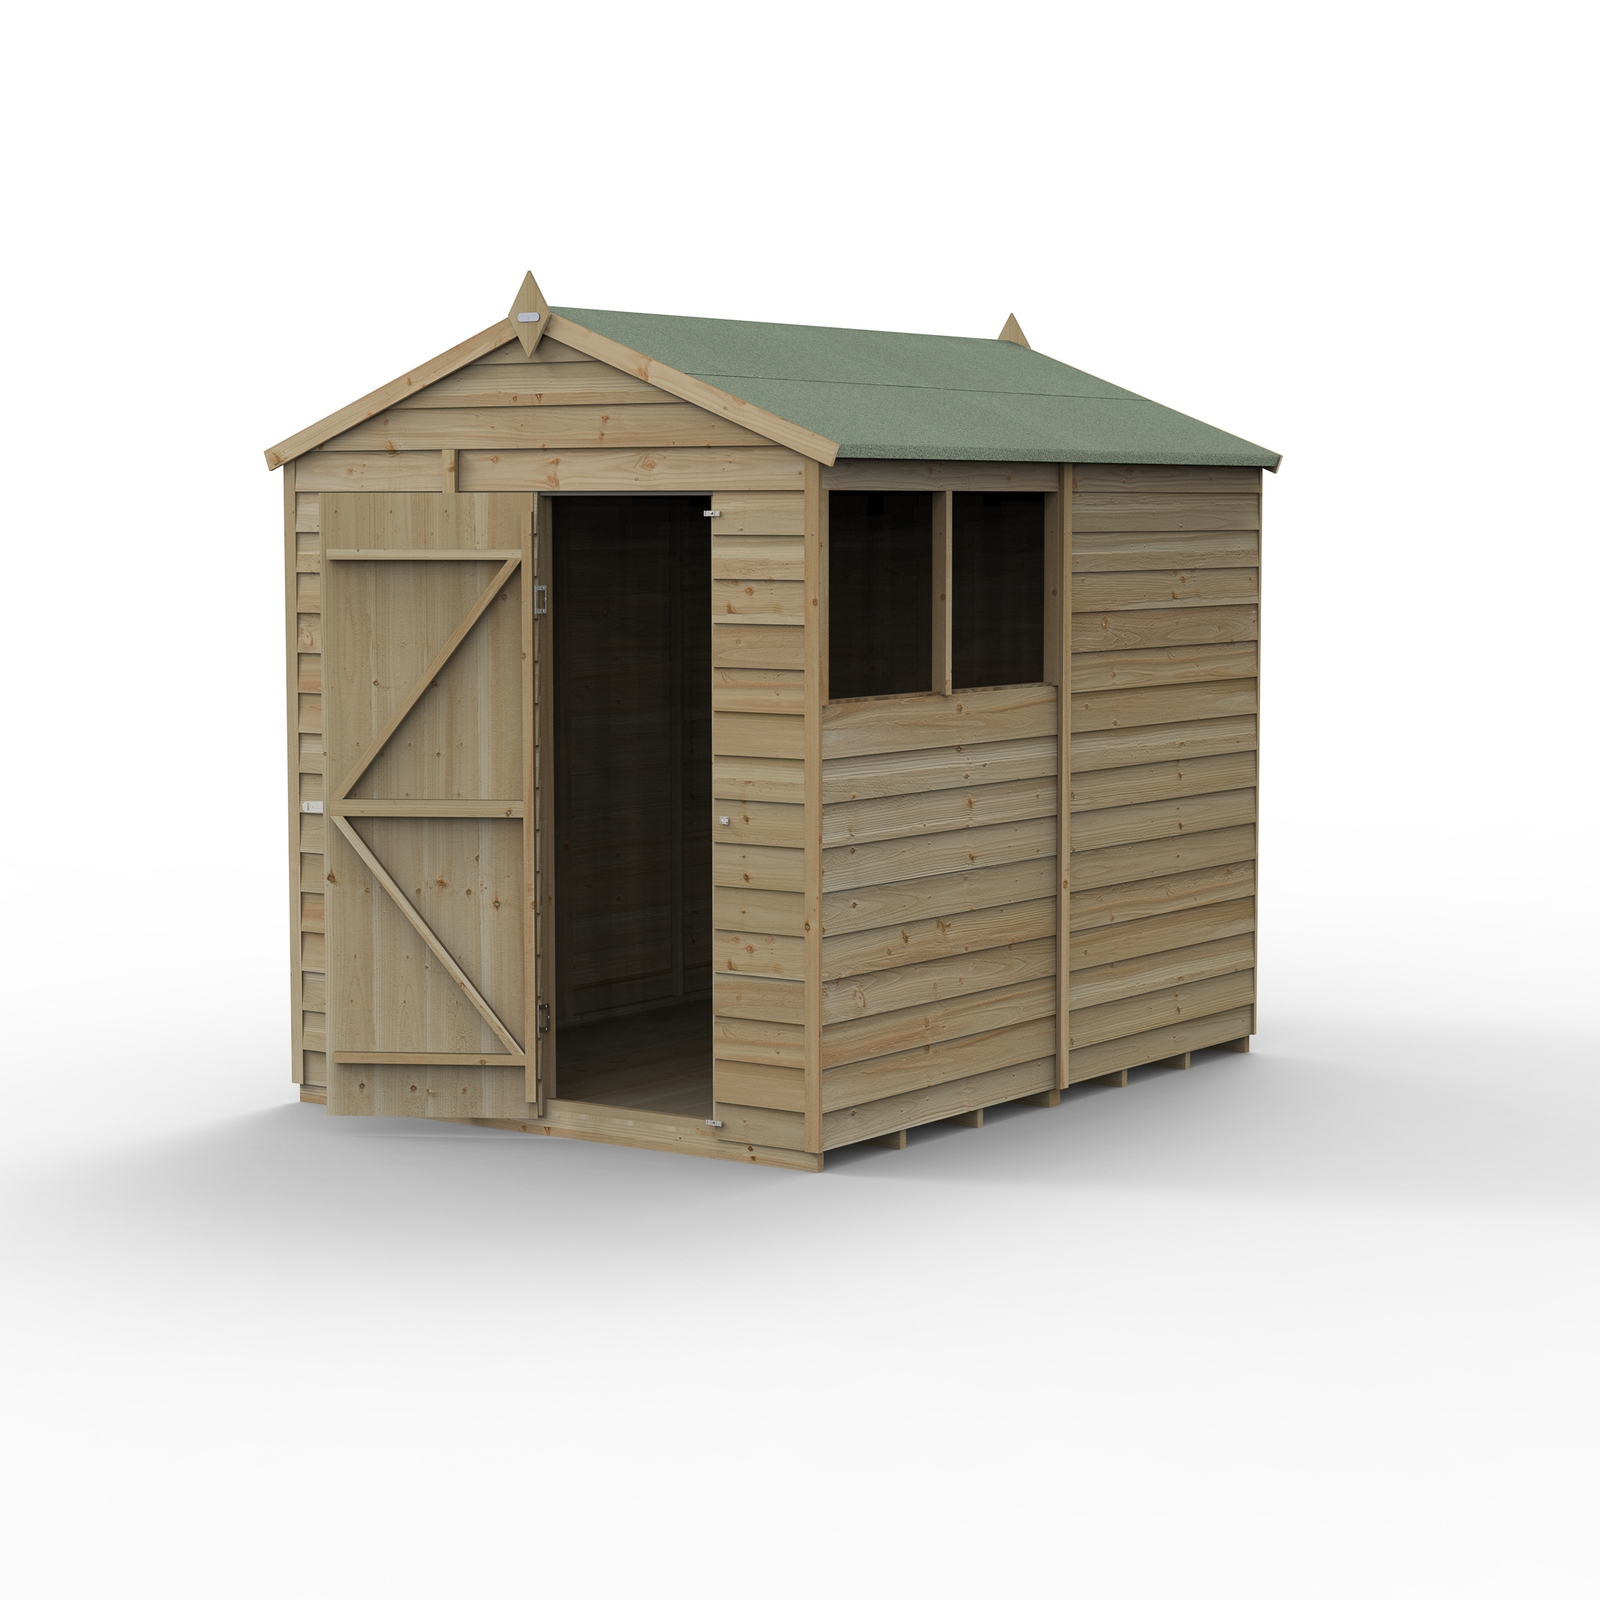 Forest Garden 4LIFE Apex Shed 6 x 8ft - Single Door 2 Window (Including Installation)